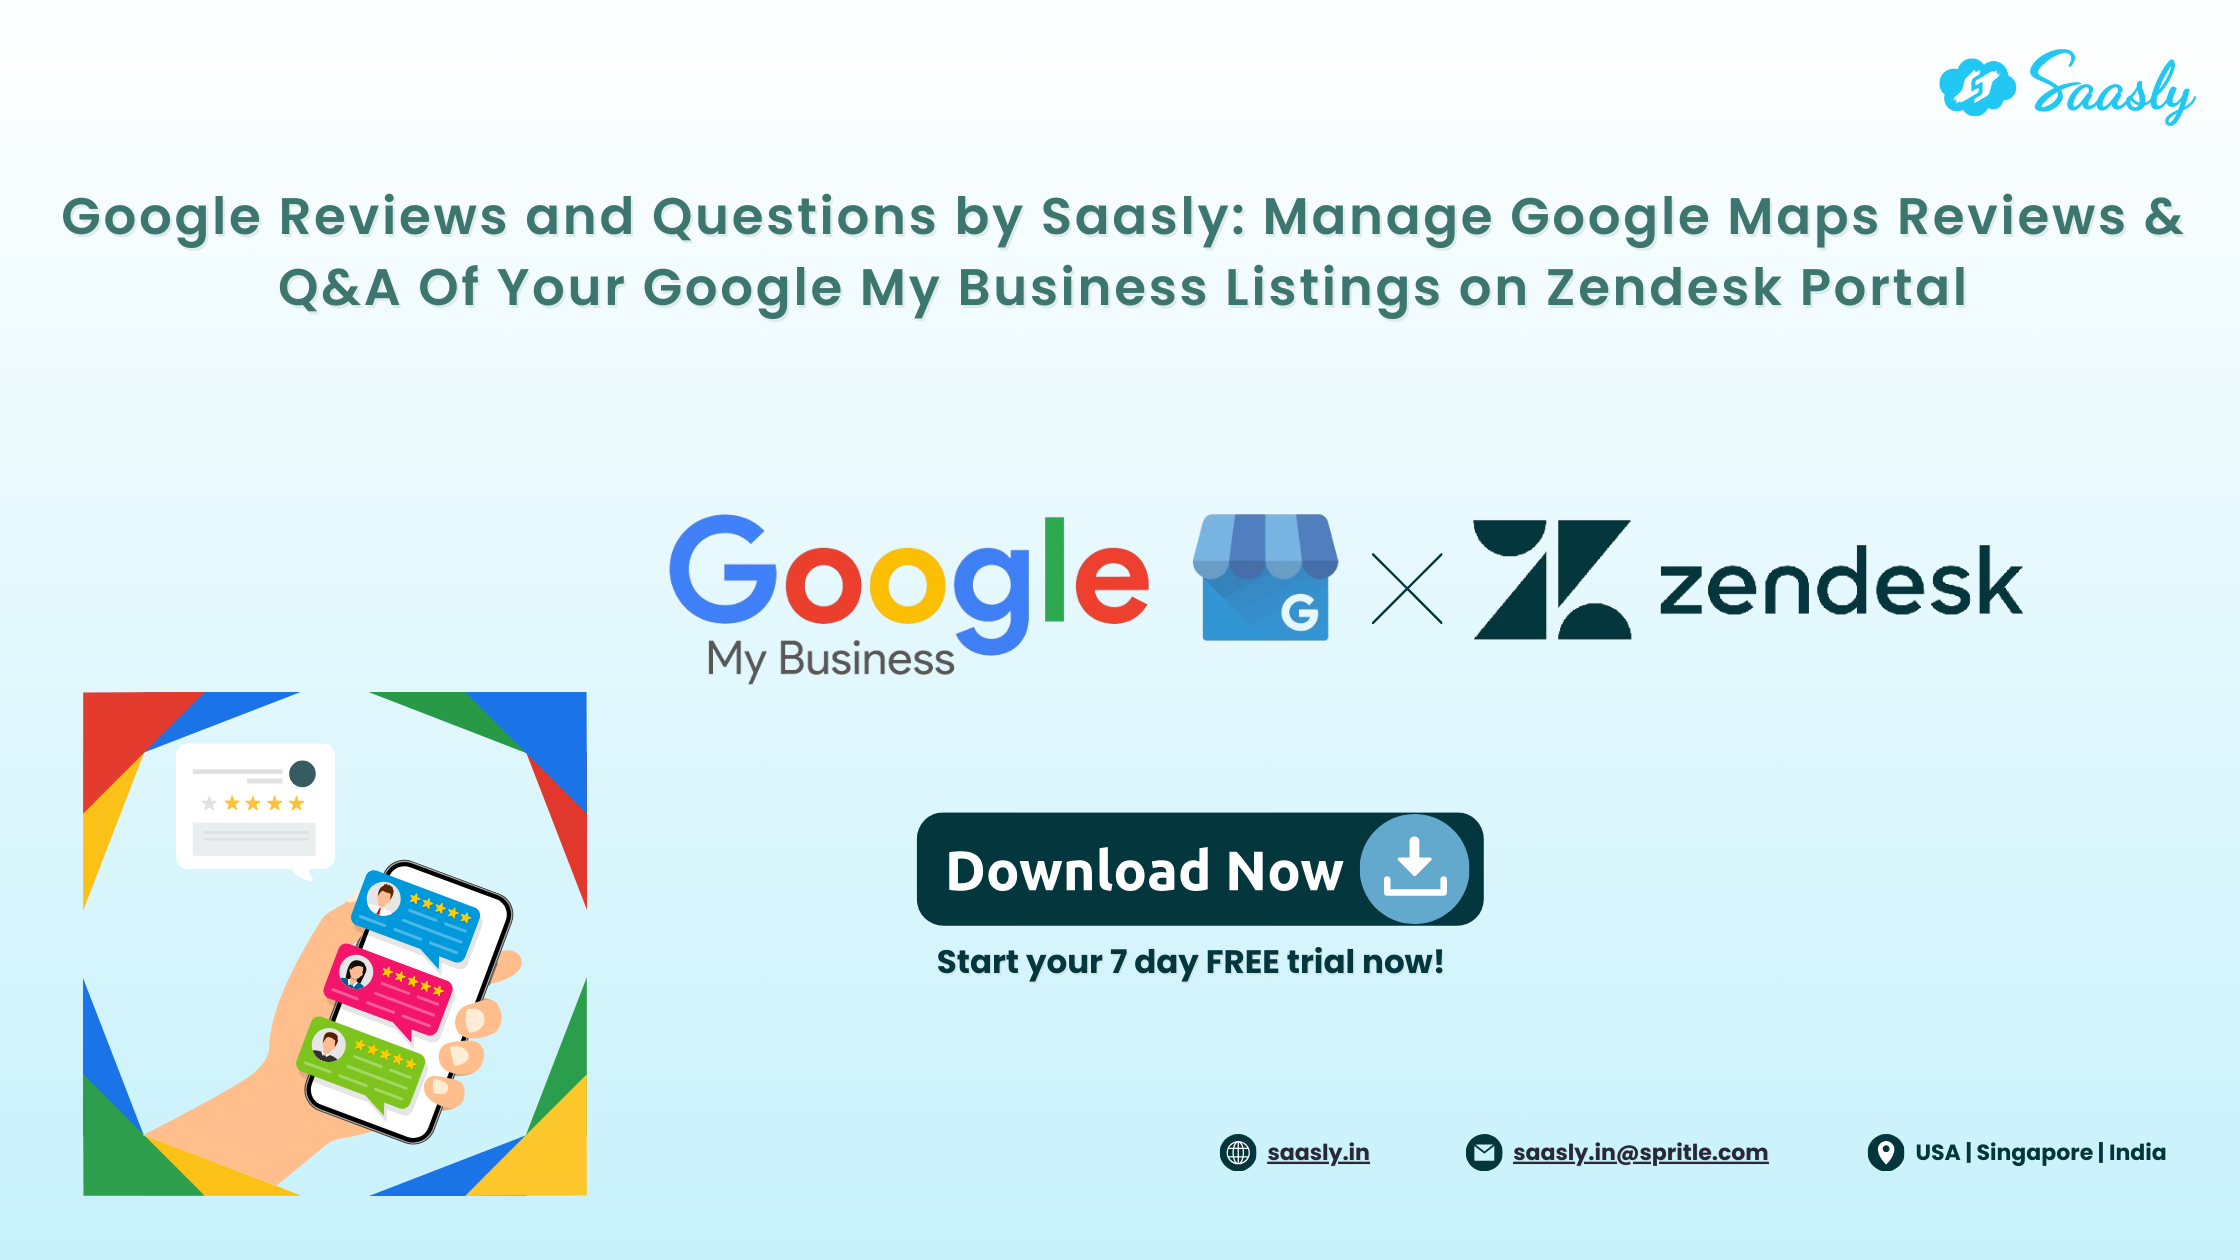 Google Reviews and Questions by Saasly : Manage Google Maps reviews & Q&A on your Google My Business listings on Zendesk Portal.